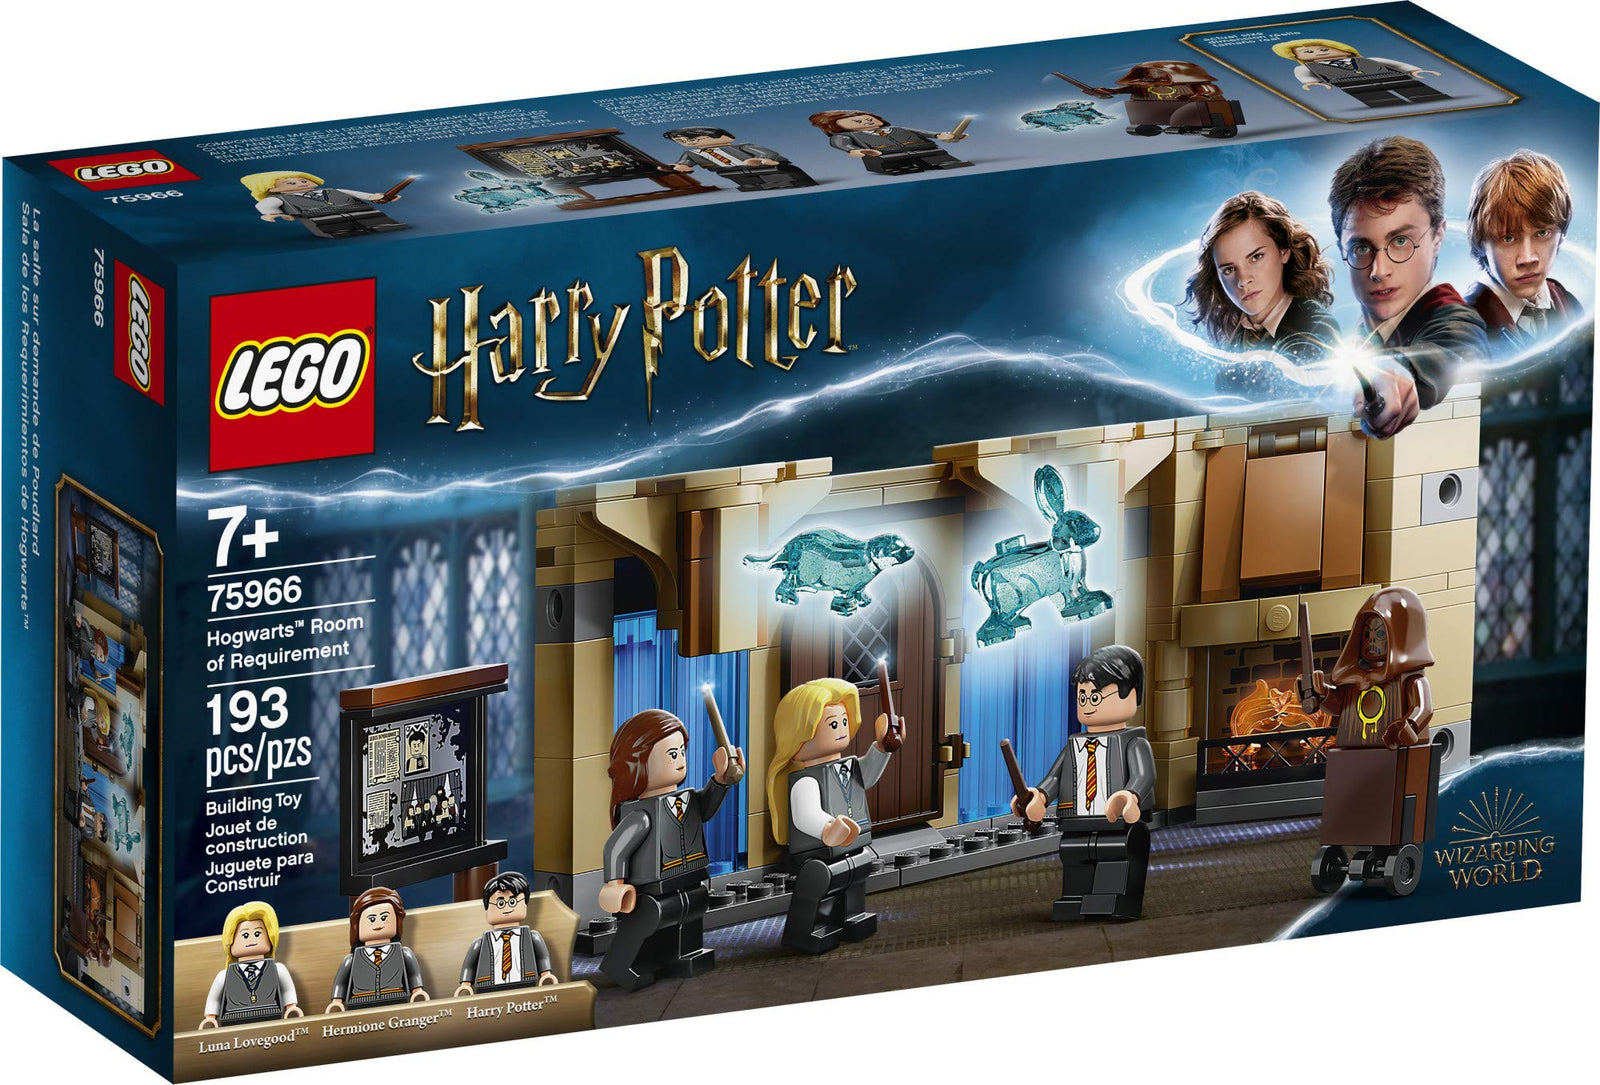 LEGO Harry Potter Hogwarts Room of Requirement 75966 Dumbledore's Army Gift Idea from Harry Potter and The Order of The Phoenix (193 Pieces)